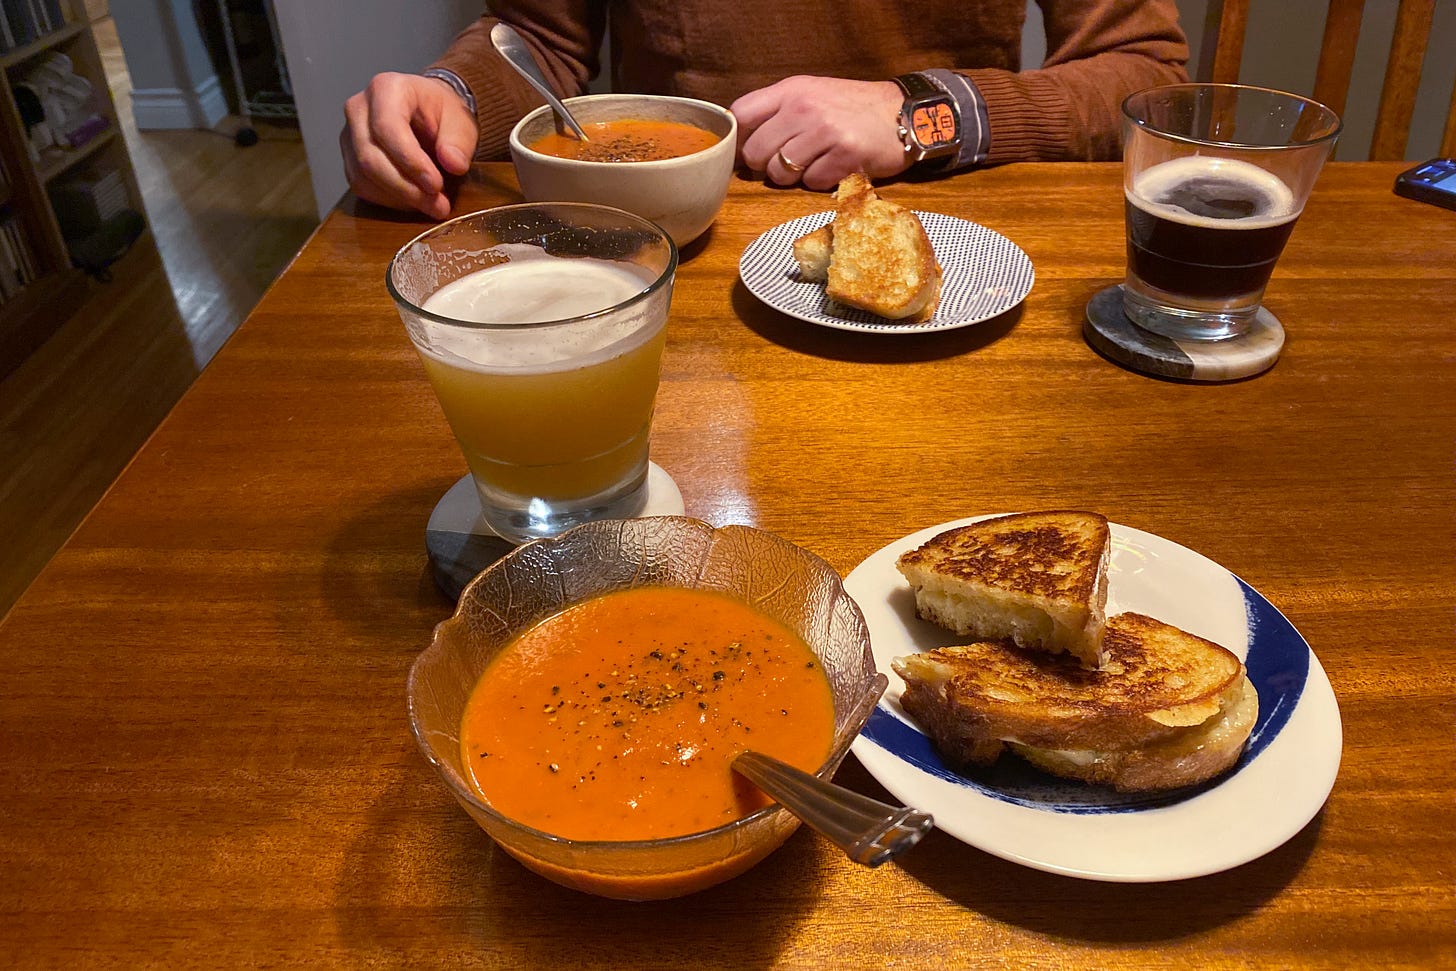 A spread of tomato soup in small bowls and grilled cheese on small plates. The soup is topped with cracked pepper and the sandwiches are cut in half. Glasses of beer are on coasters between the two dinners, and Jeff's hands are on the table near his bowl of soup.